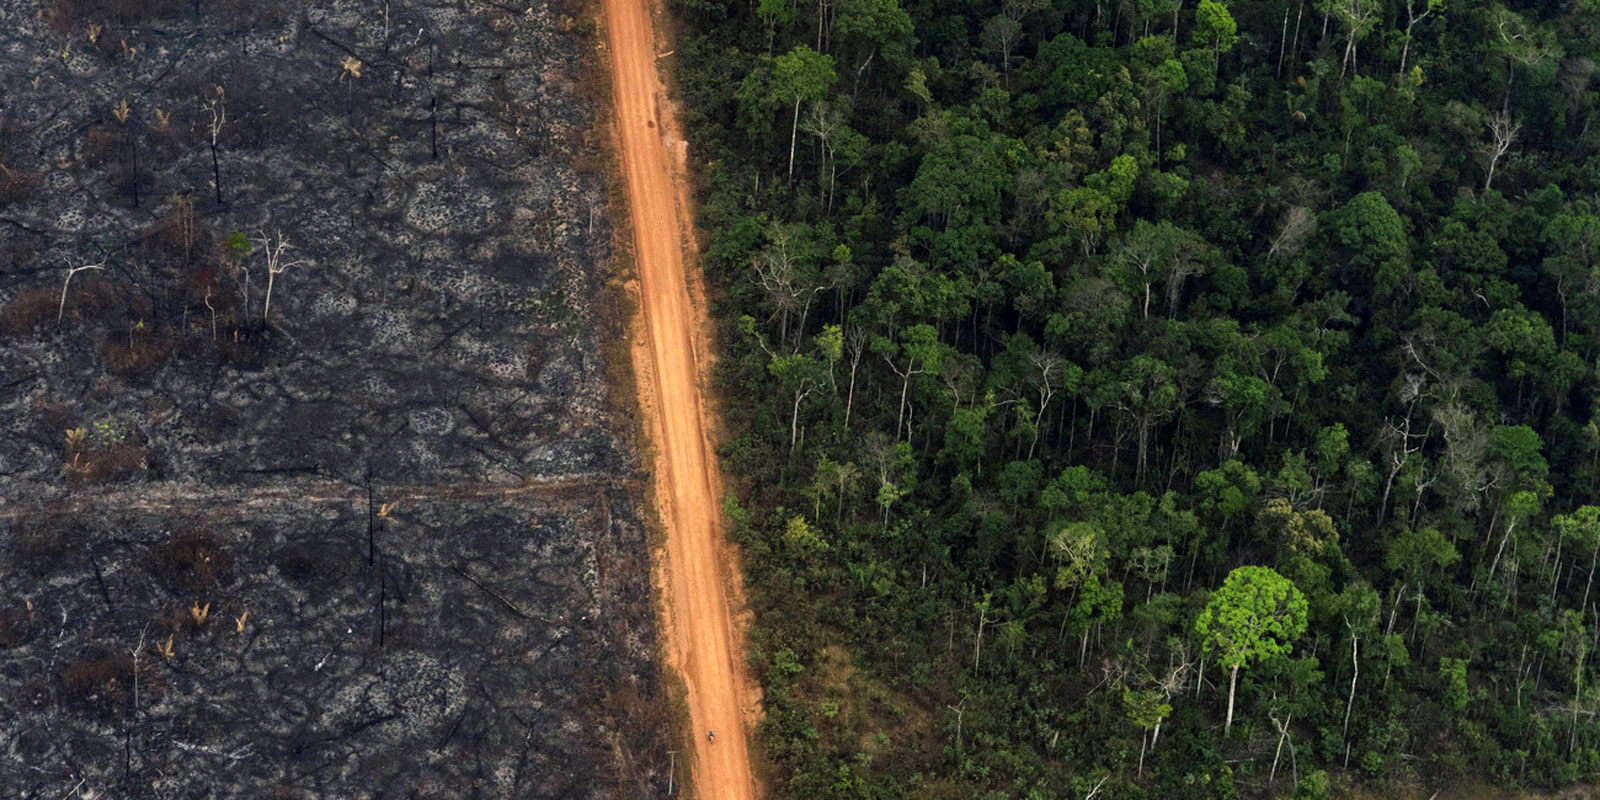 Deforestation in the South American rainforest extends along roads - as here in the Brazilian Amazon region. (AP Photo/Victor R. Caivano) 